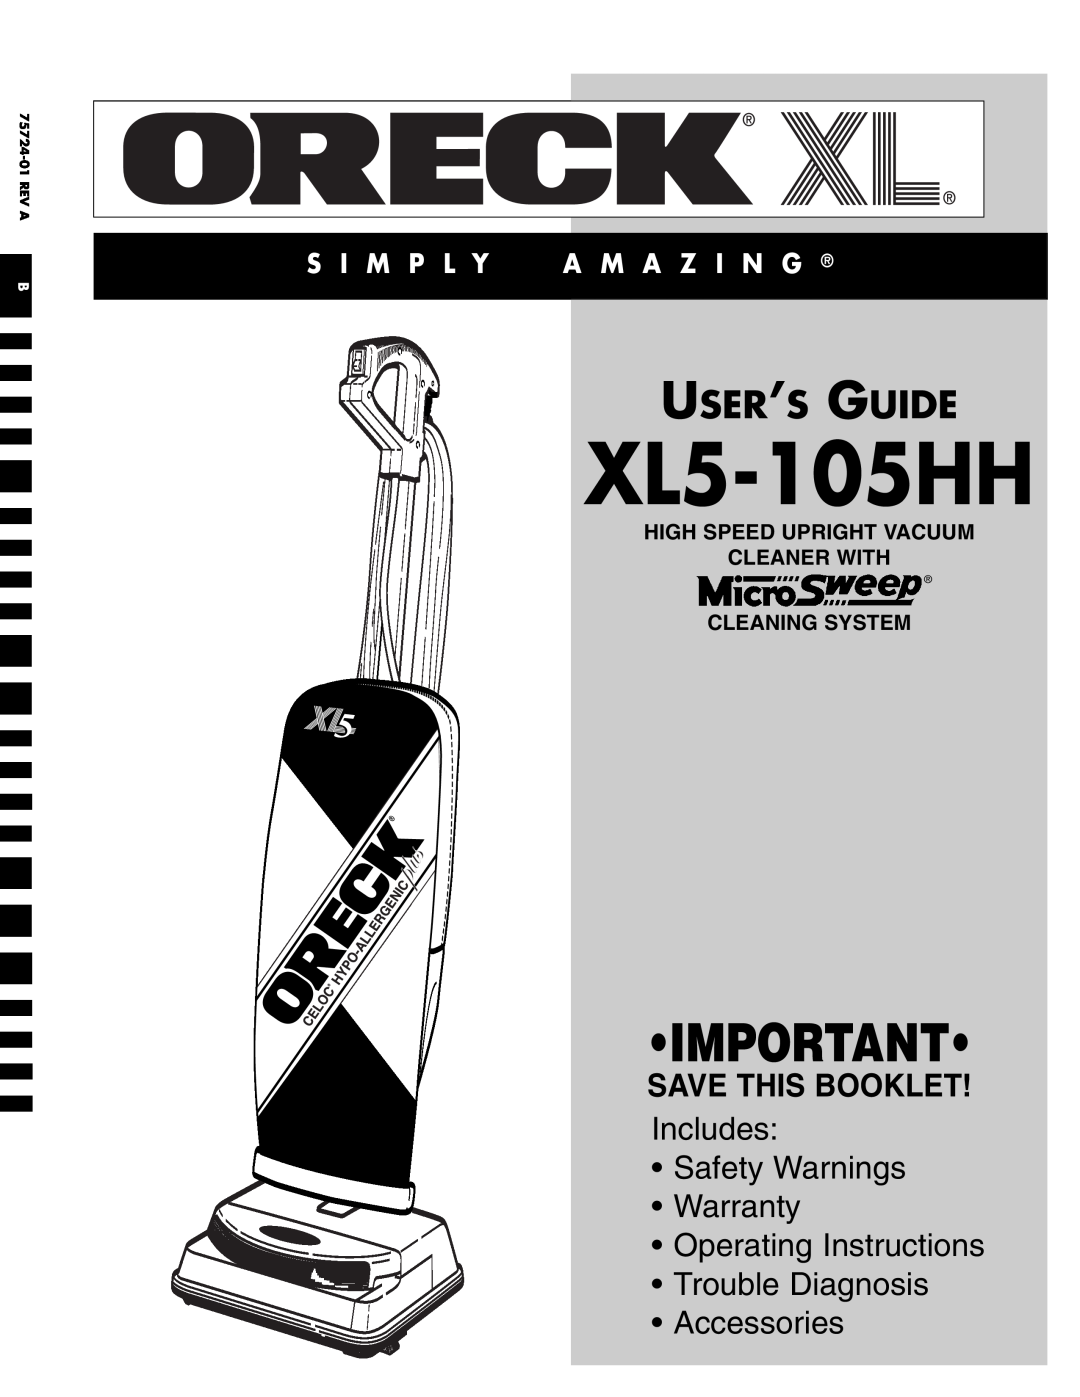 Oreck XL5-105HH warranty High Speed Upright Vacuum Cleaner With, Cleaning System, User’S Guide, Save This Booklet 